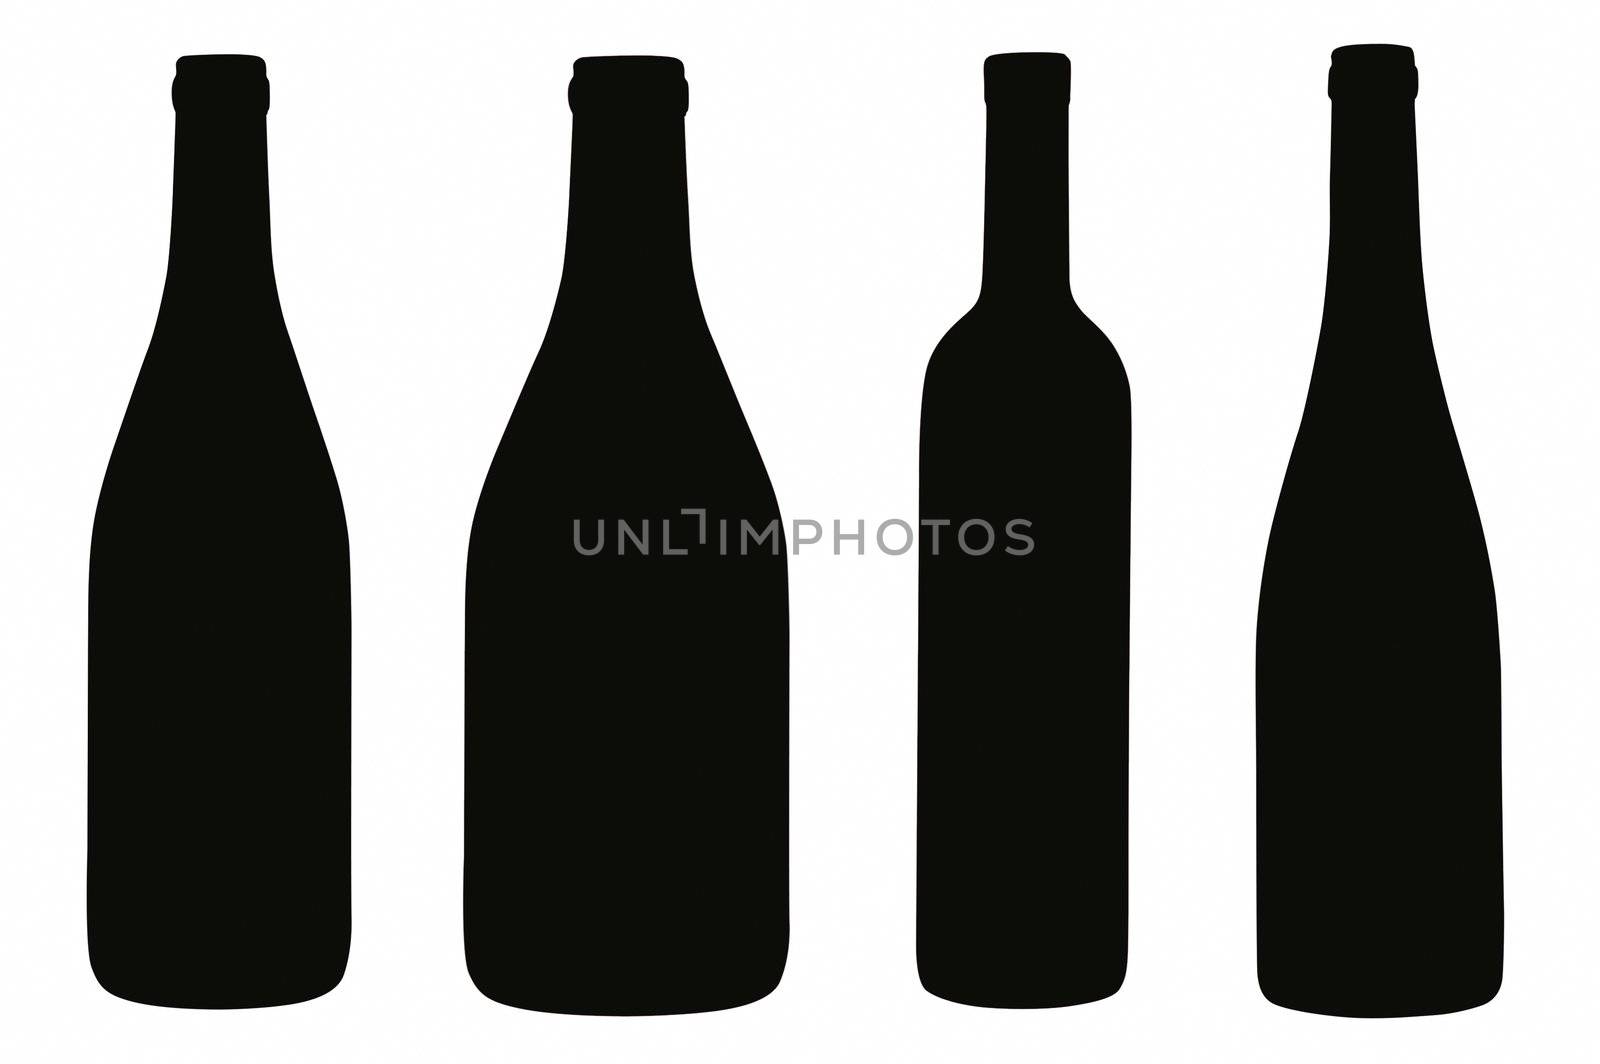 Abstract bottles by rusak